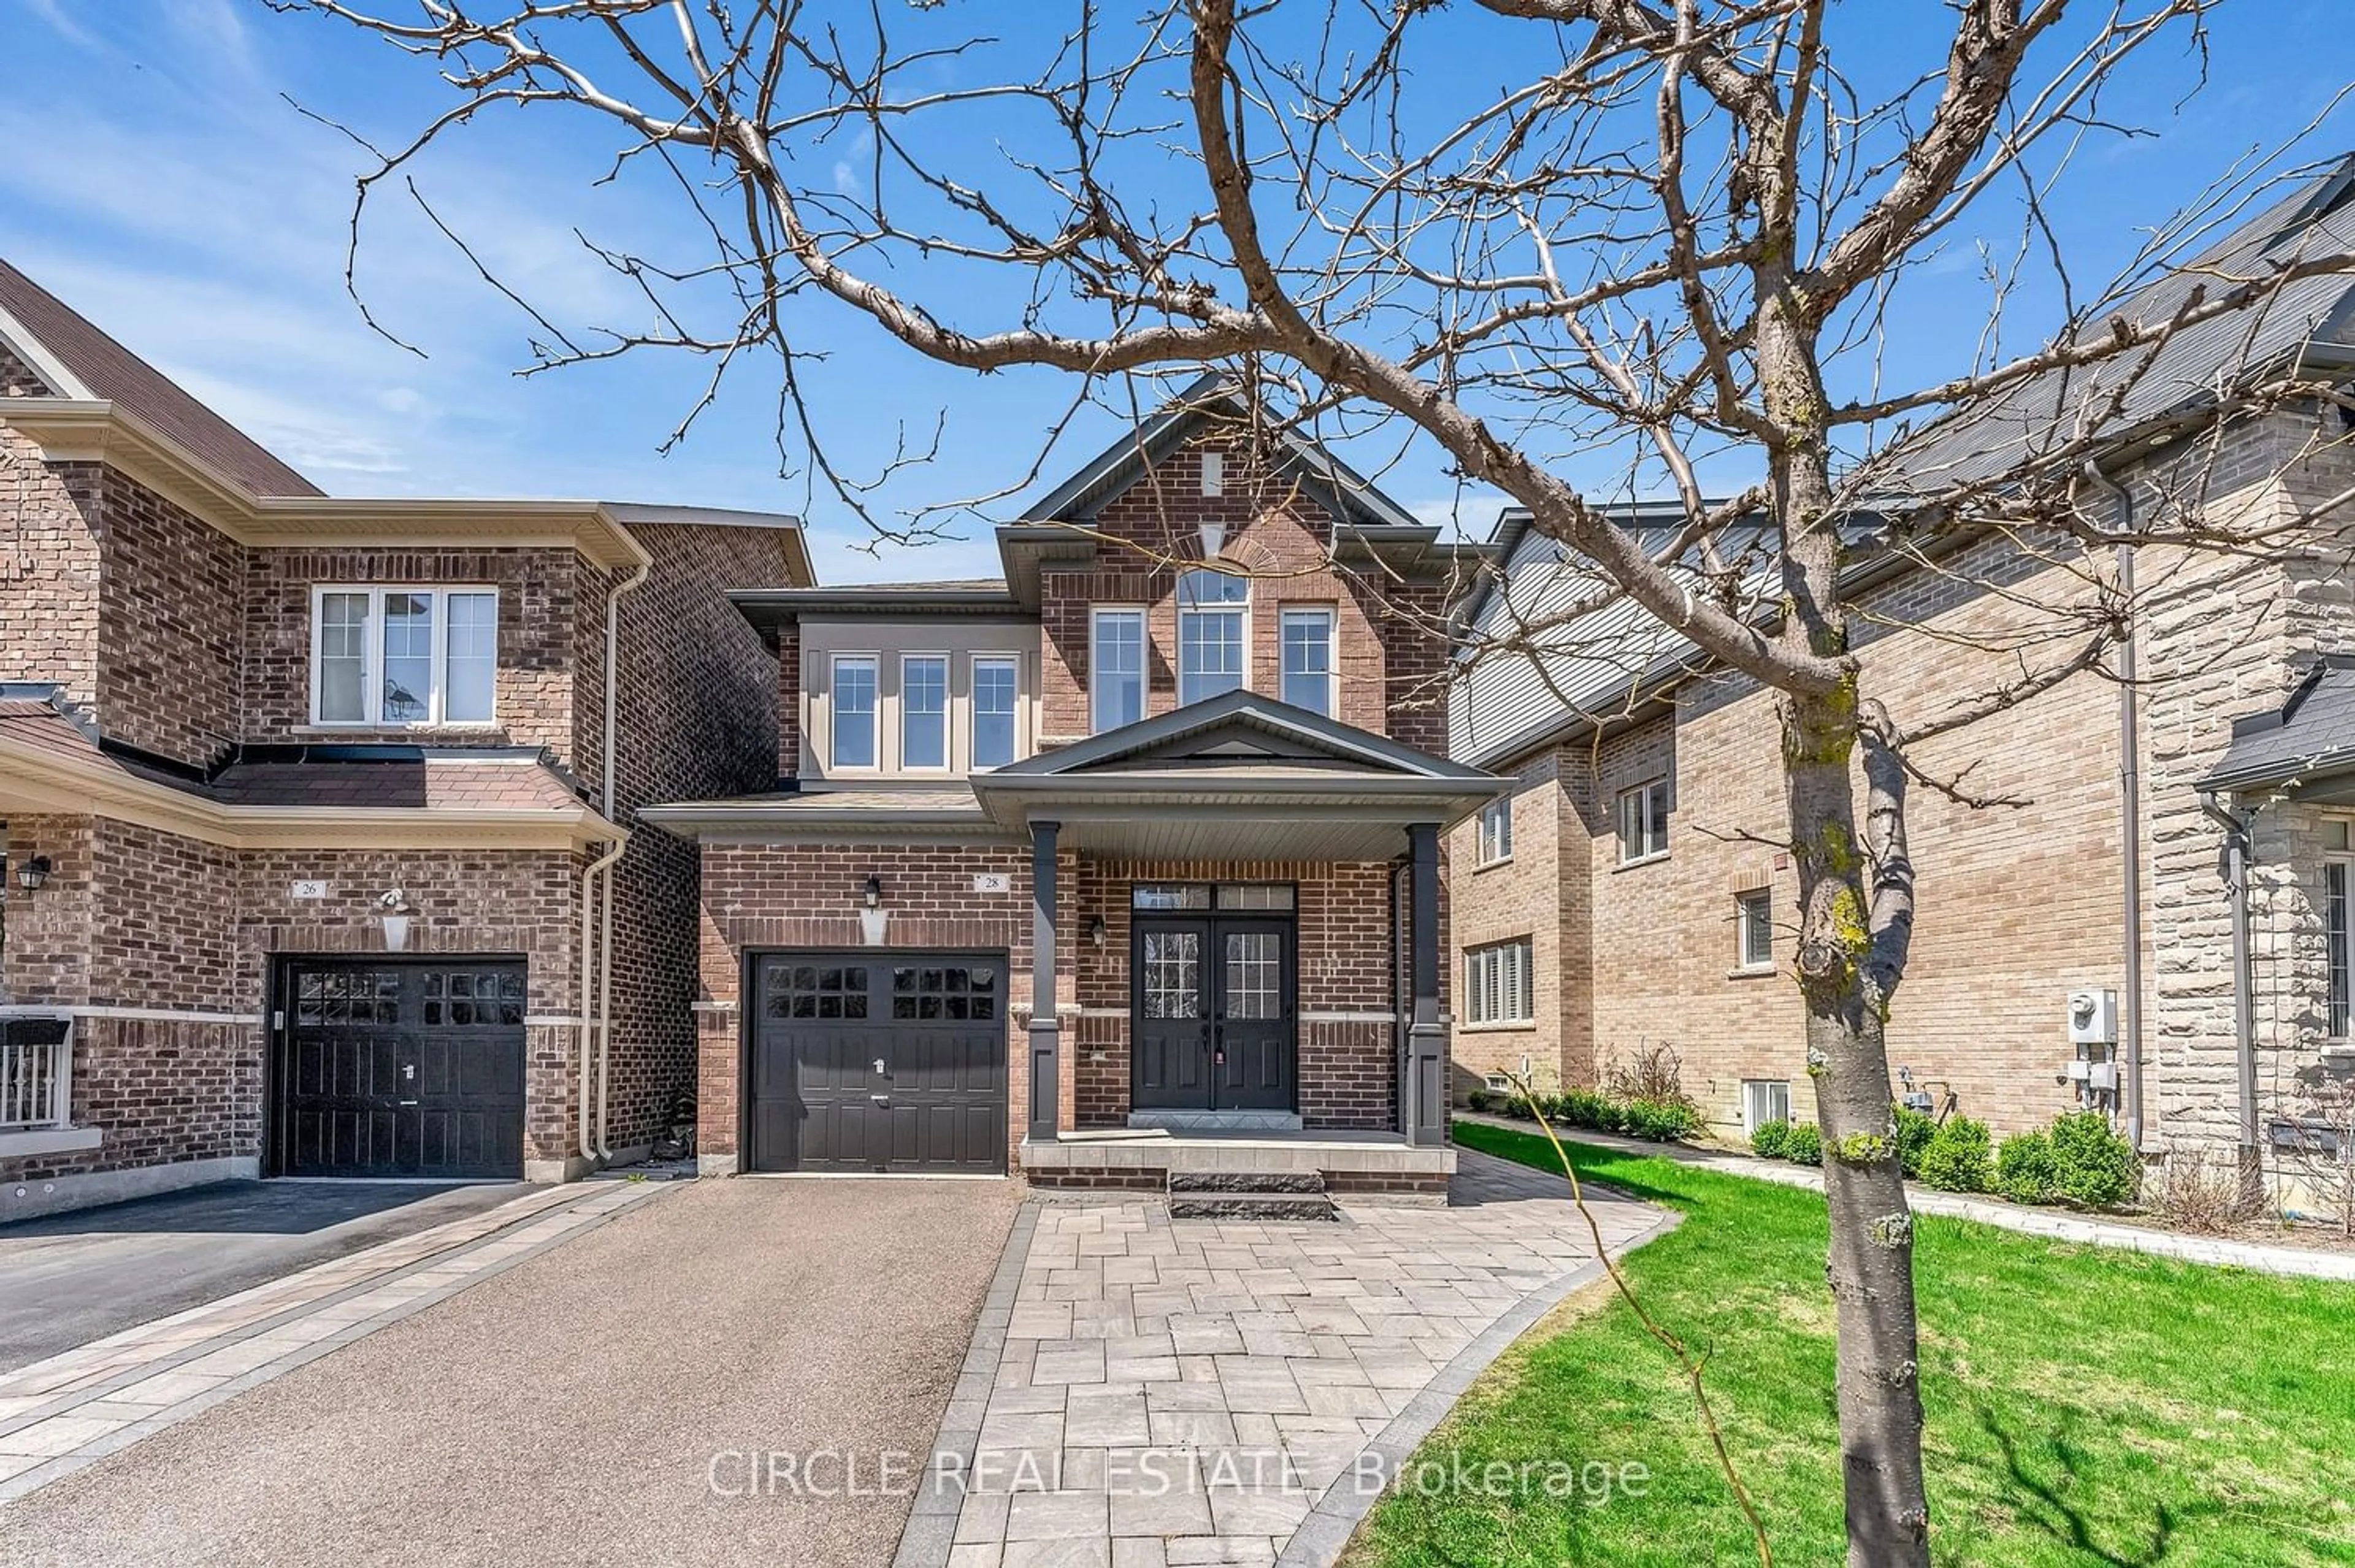 Home with brick exterior material for 28 Avening Dr, Vaughan Ontario L4H 3Y4